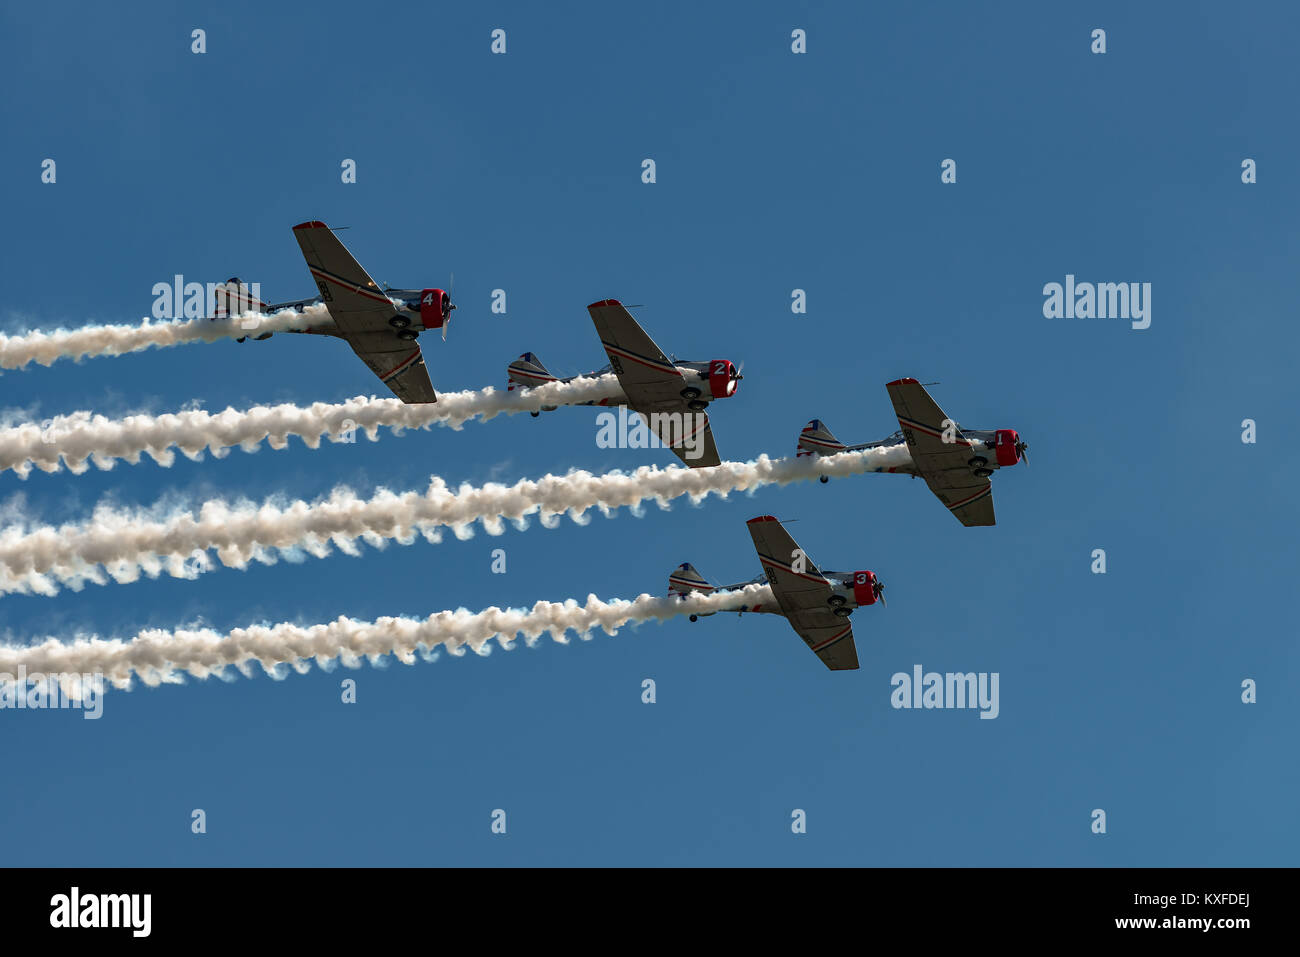 READING, PA - JUNE 3, 2017: The GEICO Skytypers in flight during World War II reenactment at Mid-Atlantic Air Museum Stock Photo